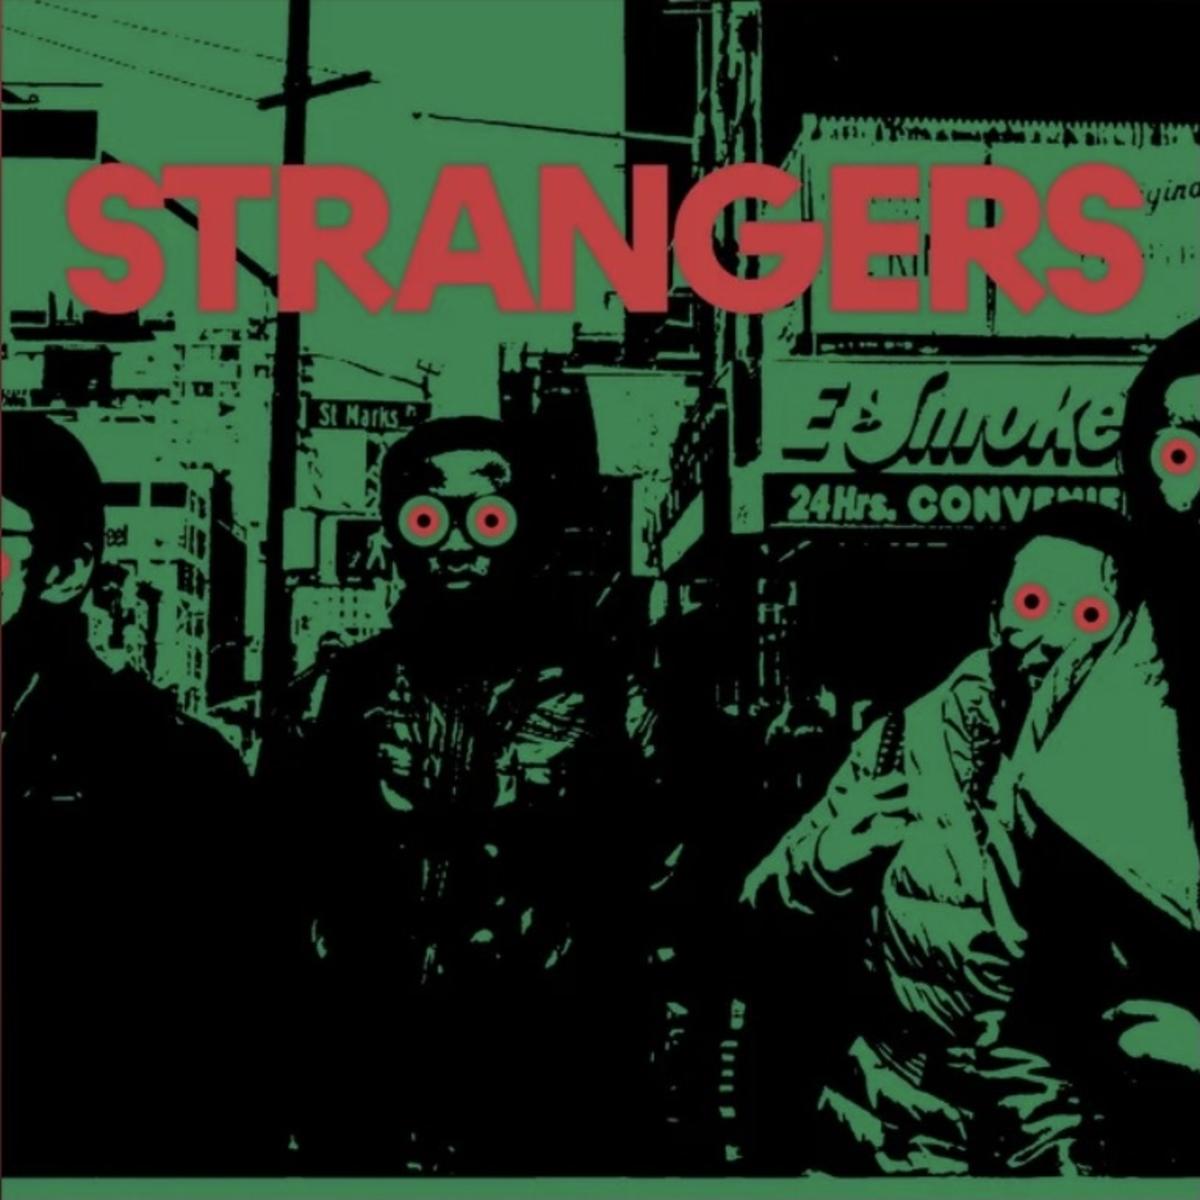 Danger Mouse & Black Thought Recruit A$AP Rocky & Run The Jewels For “Strangers”